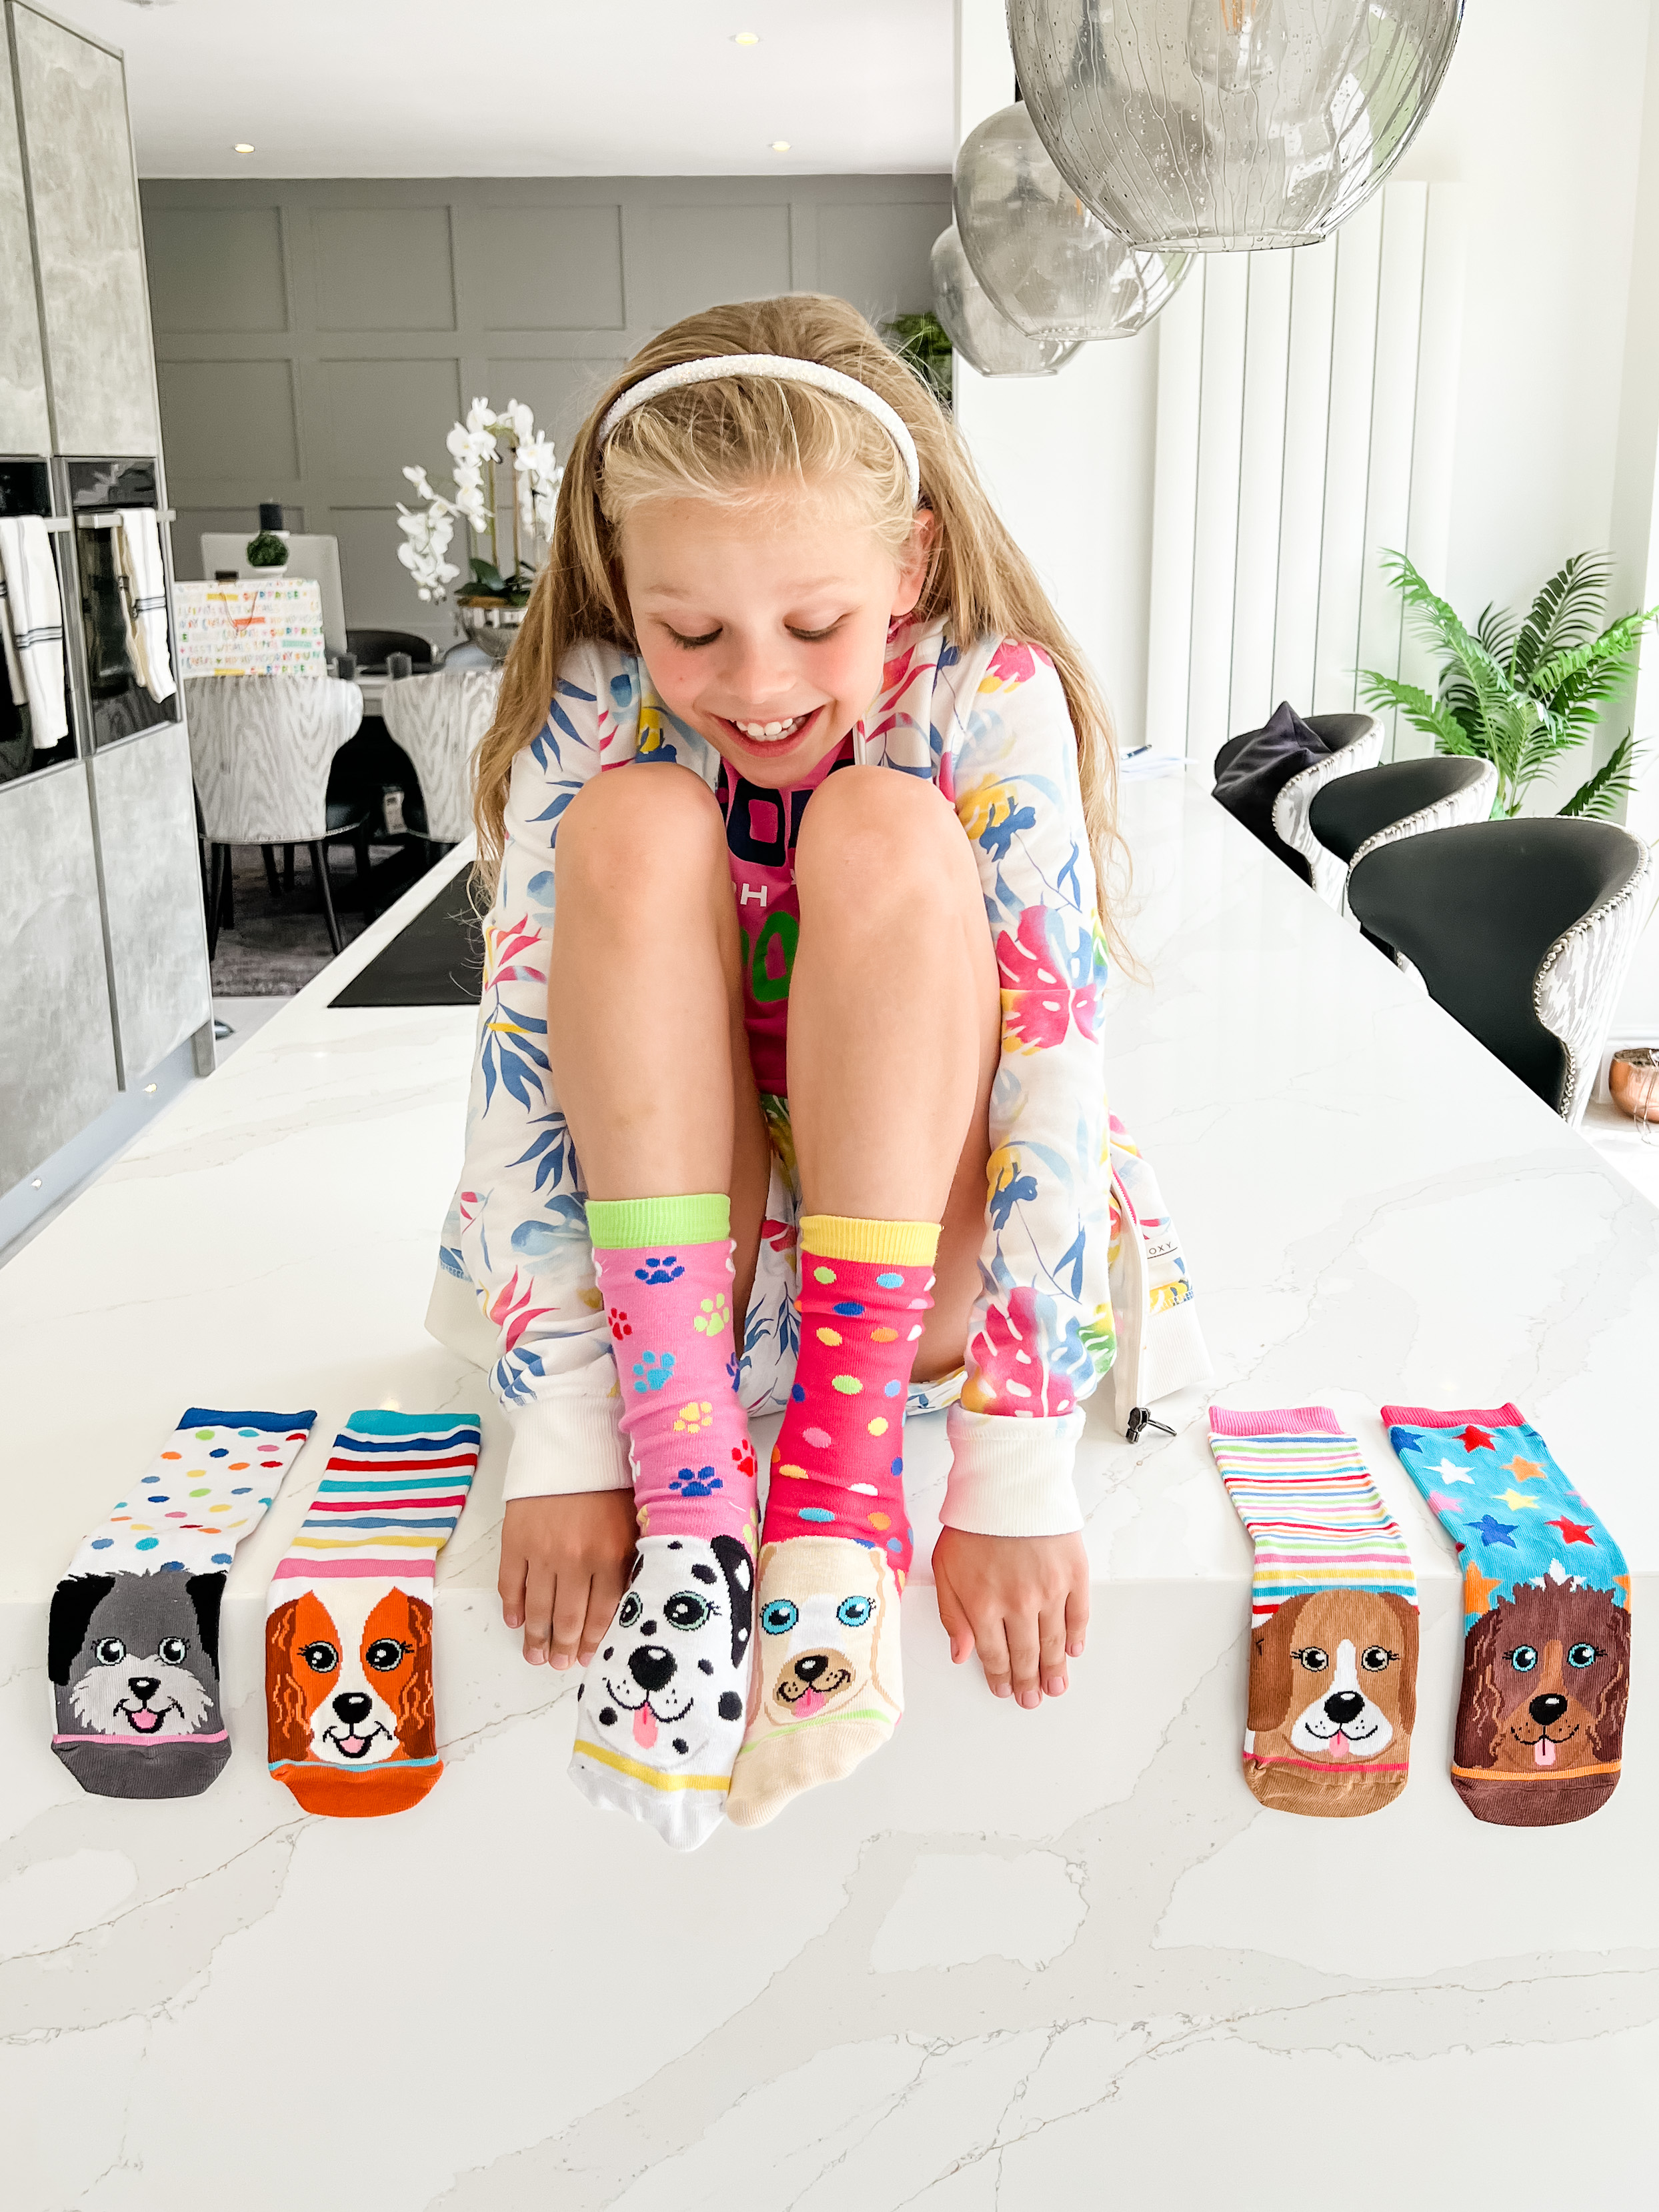 A girl sitting on the edge of a counter. She is wearing odd shocks with dogs on the toes, with 4 other odd socks with dogs on them lined up on either side of her.